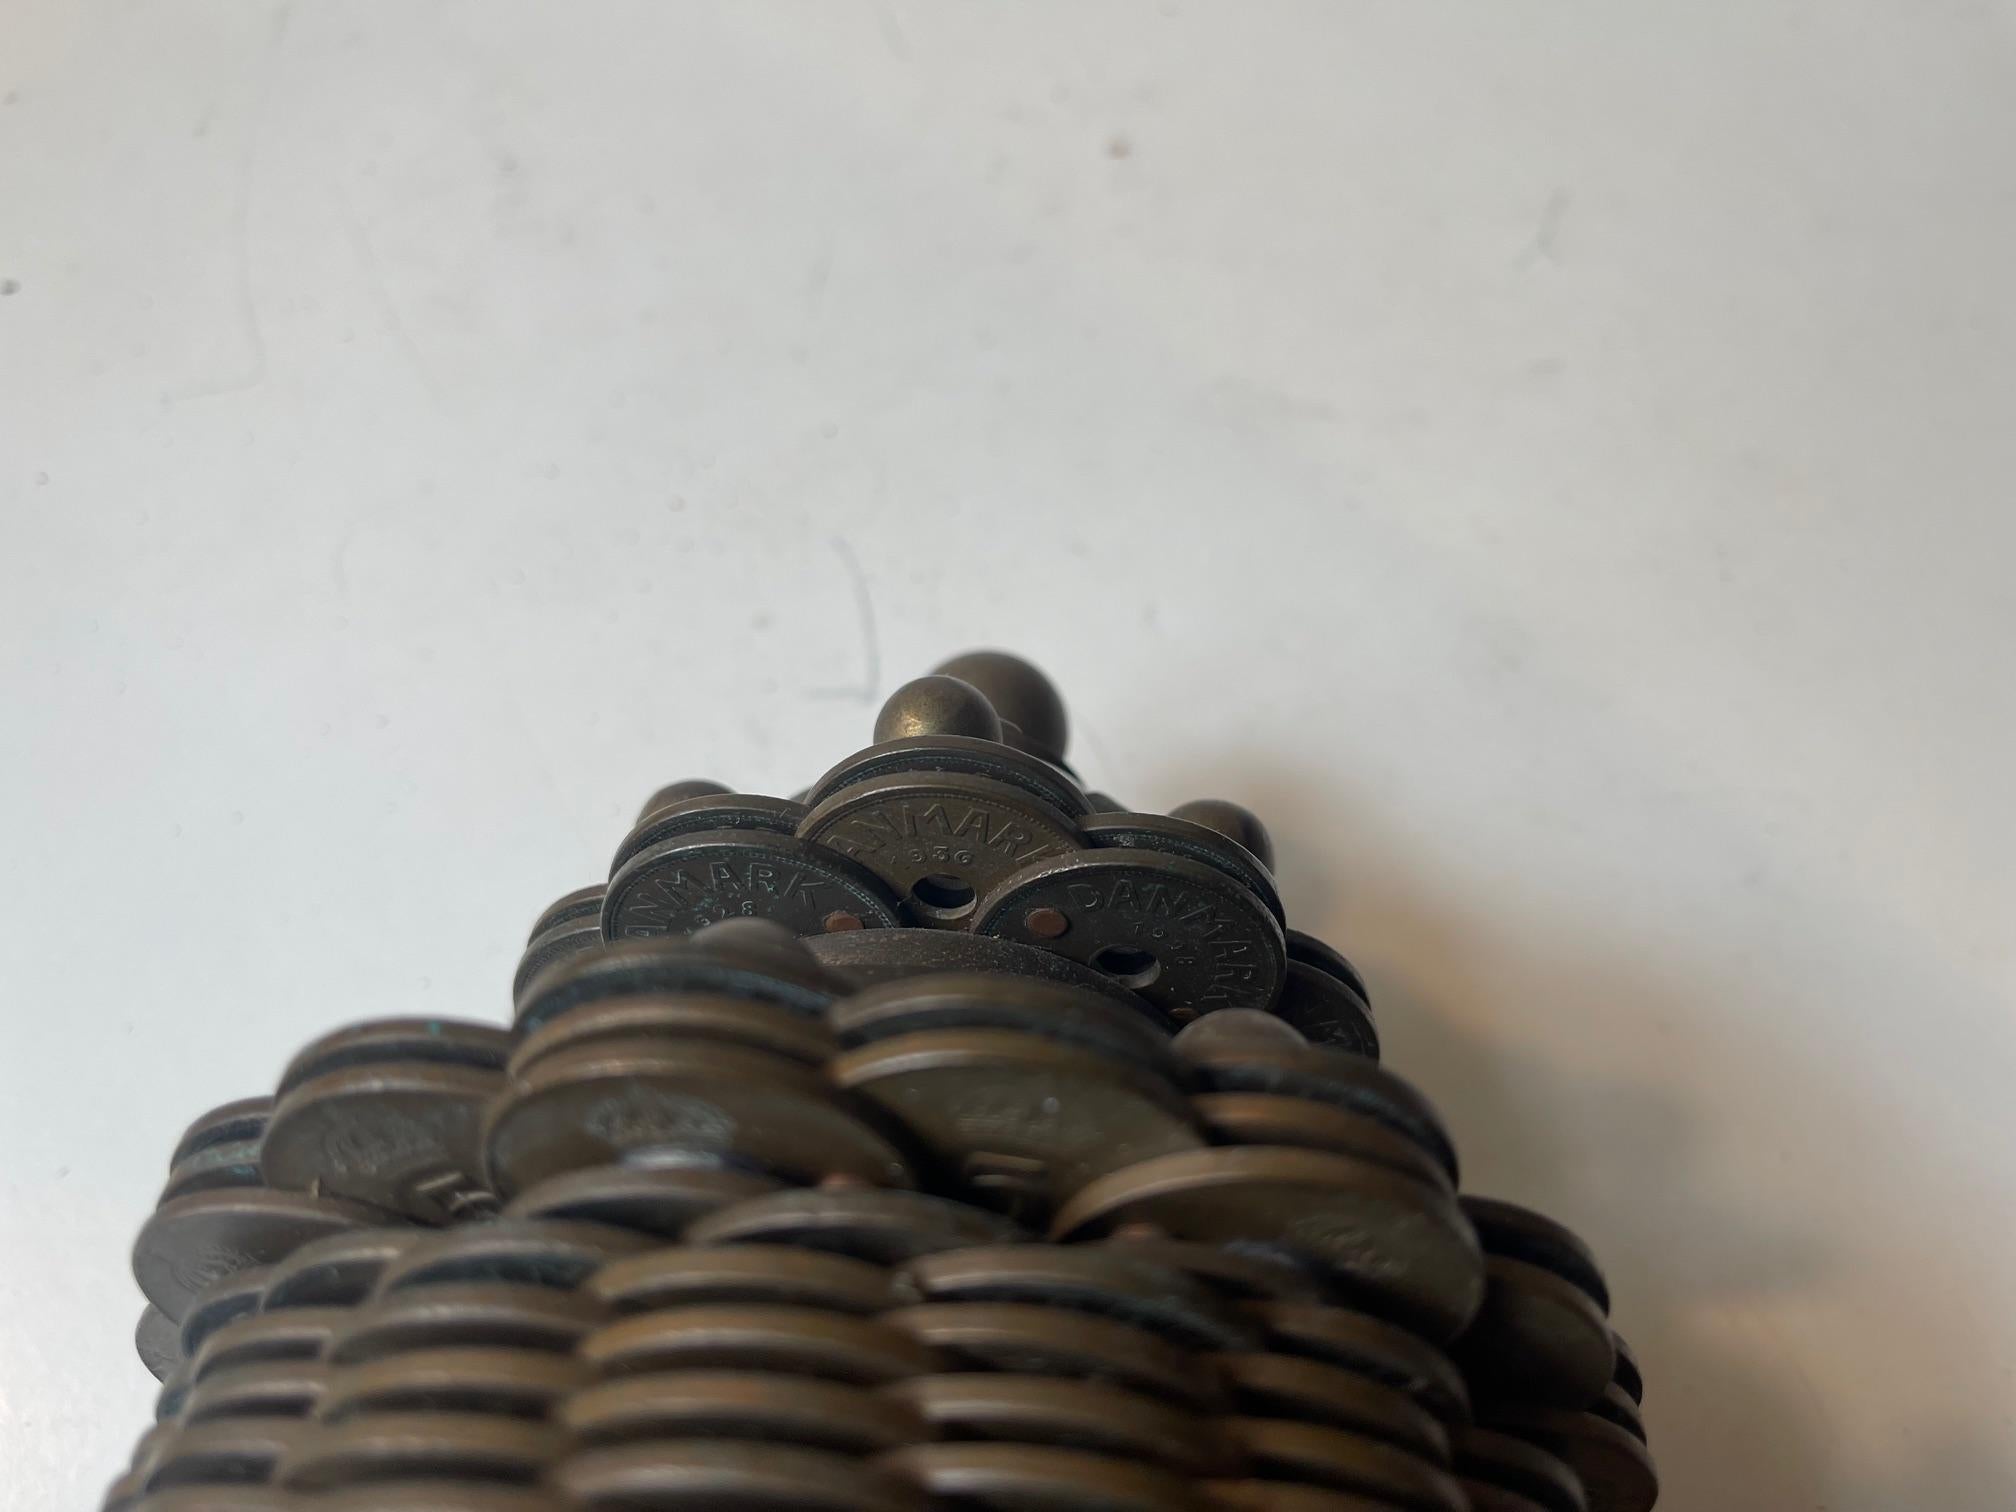 Vintage Danish Hippie Up-cycled Coin Mountain Sculpture, 1970s In Good Condition For Sale In Esbjerg, DK